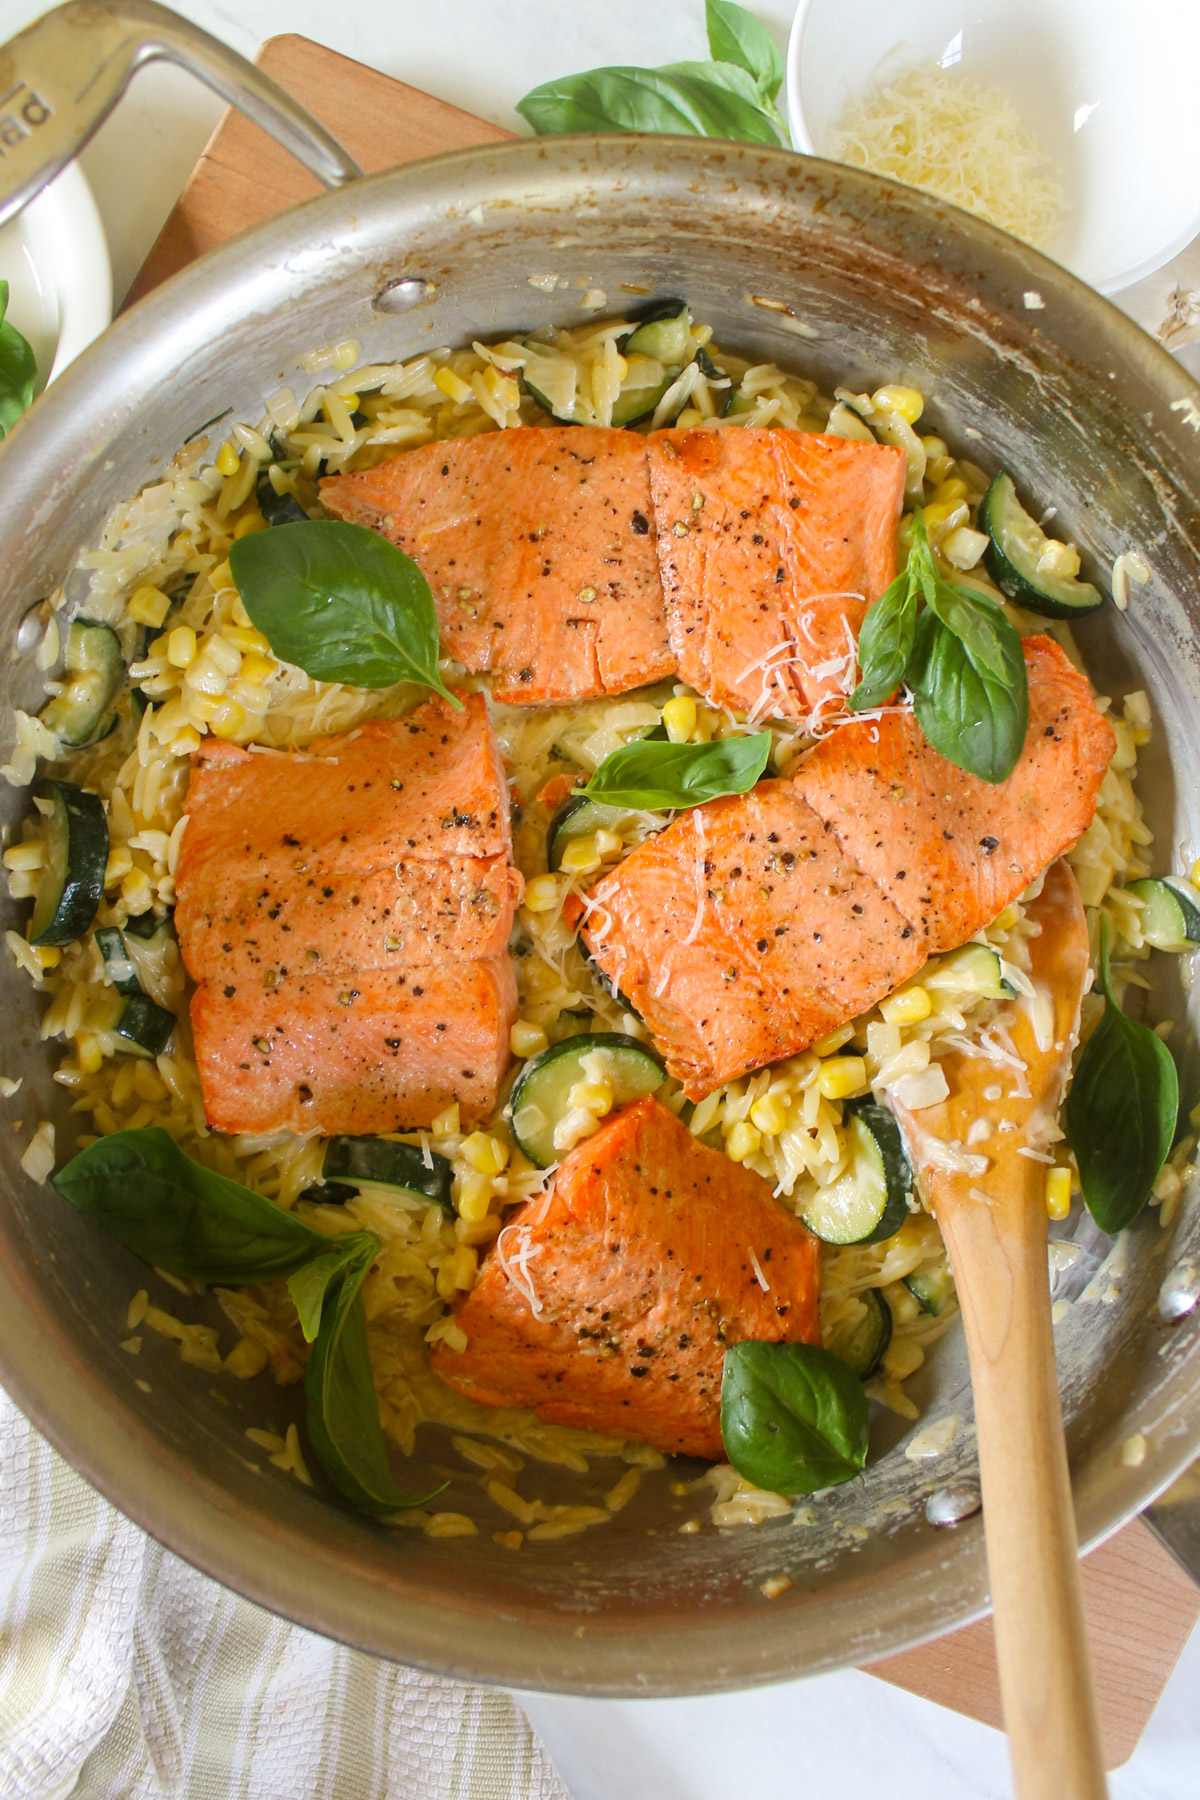 Salmon filets over orzo pasta with zucchini, corn and basil in a skillet.